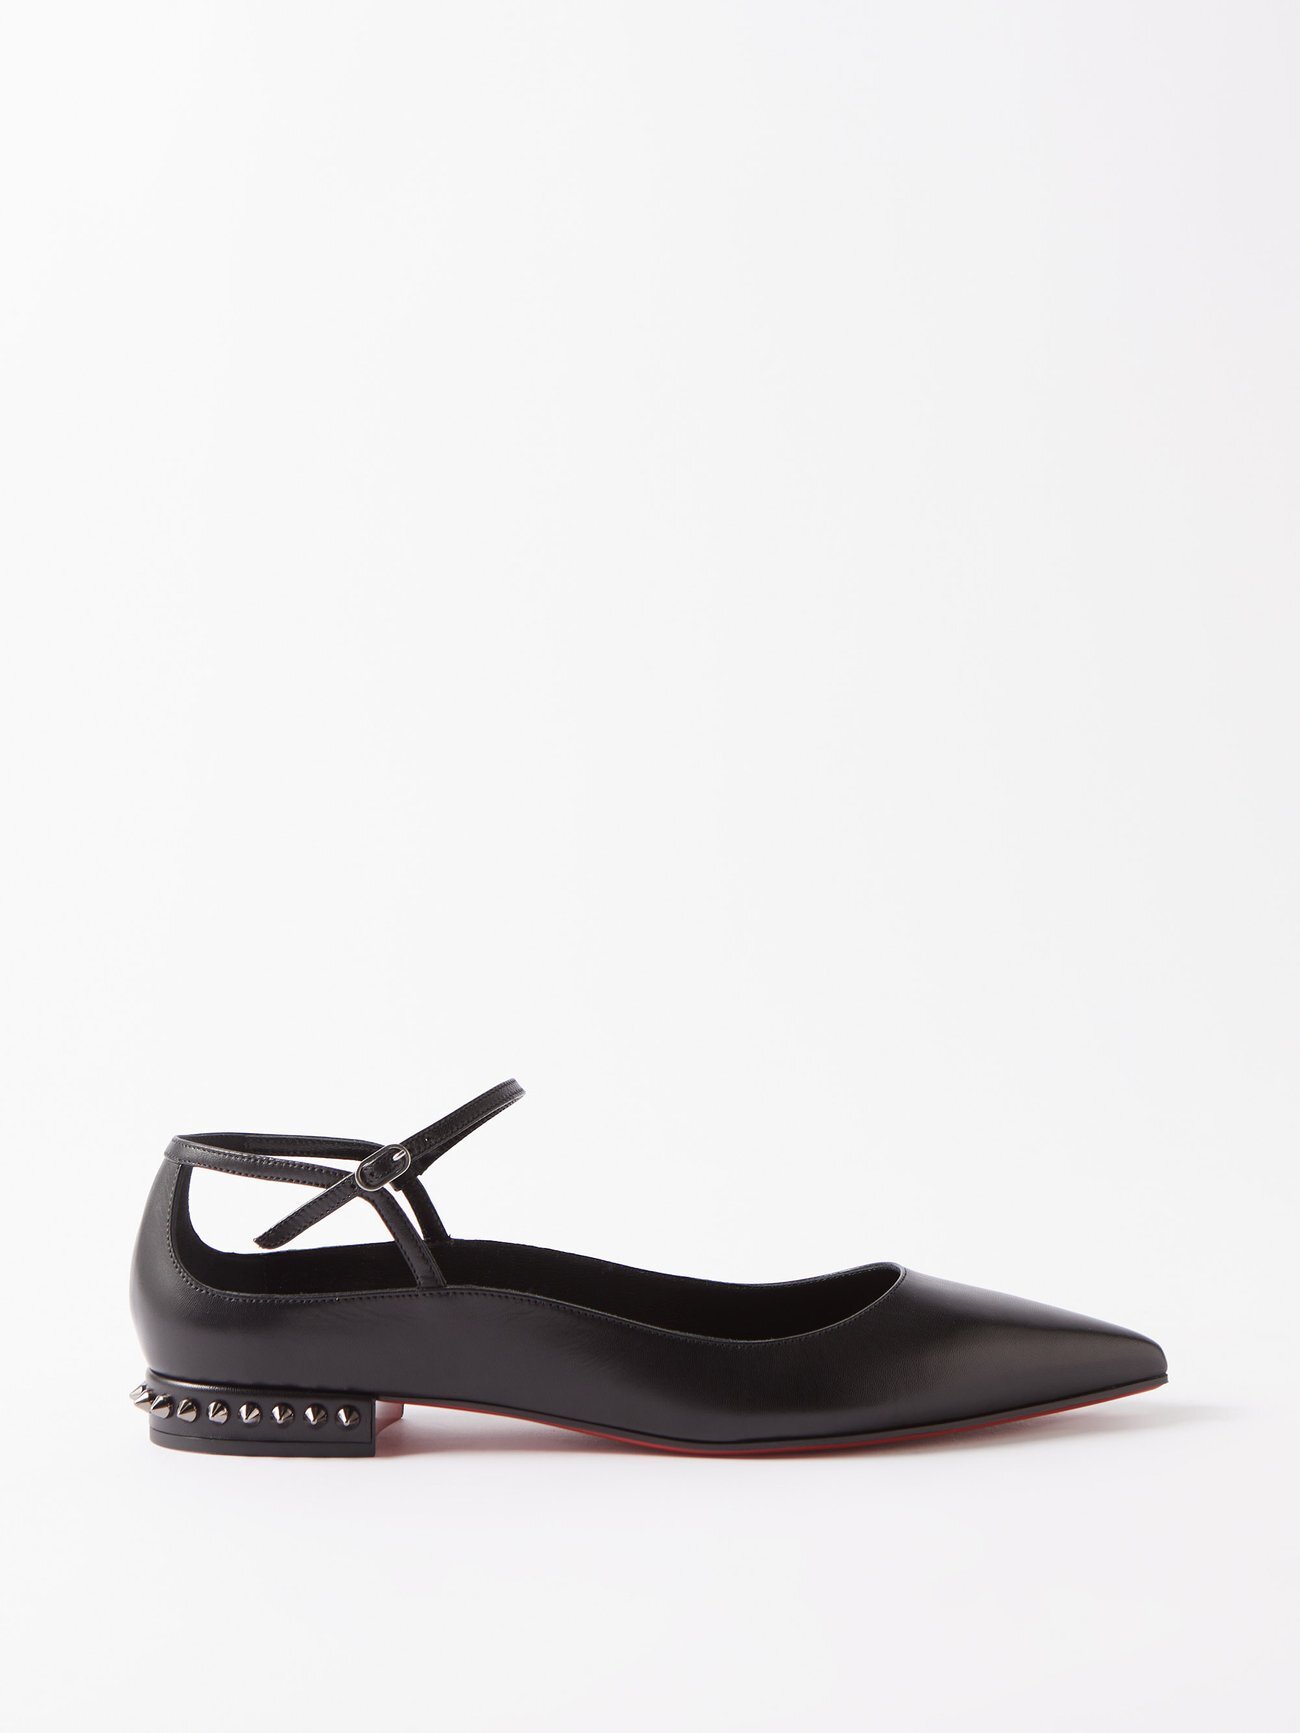 Christian Louboutin - Conclusive Spike Leather Ballet Flats - Womens - Black